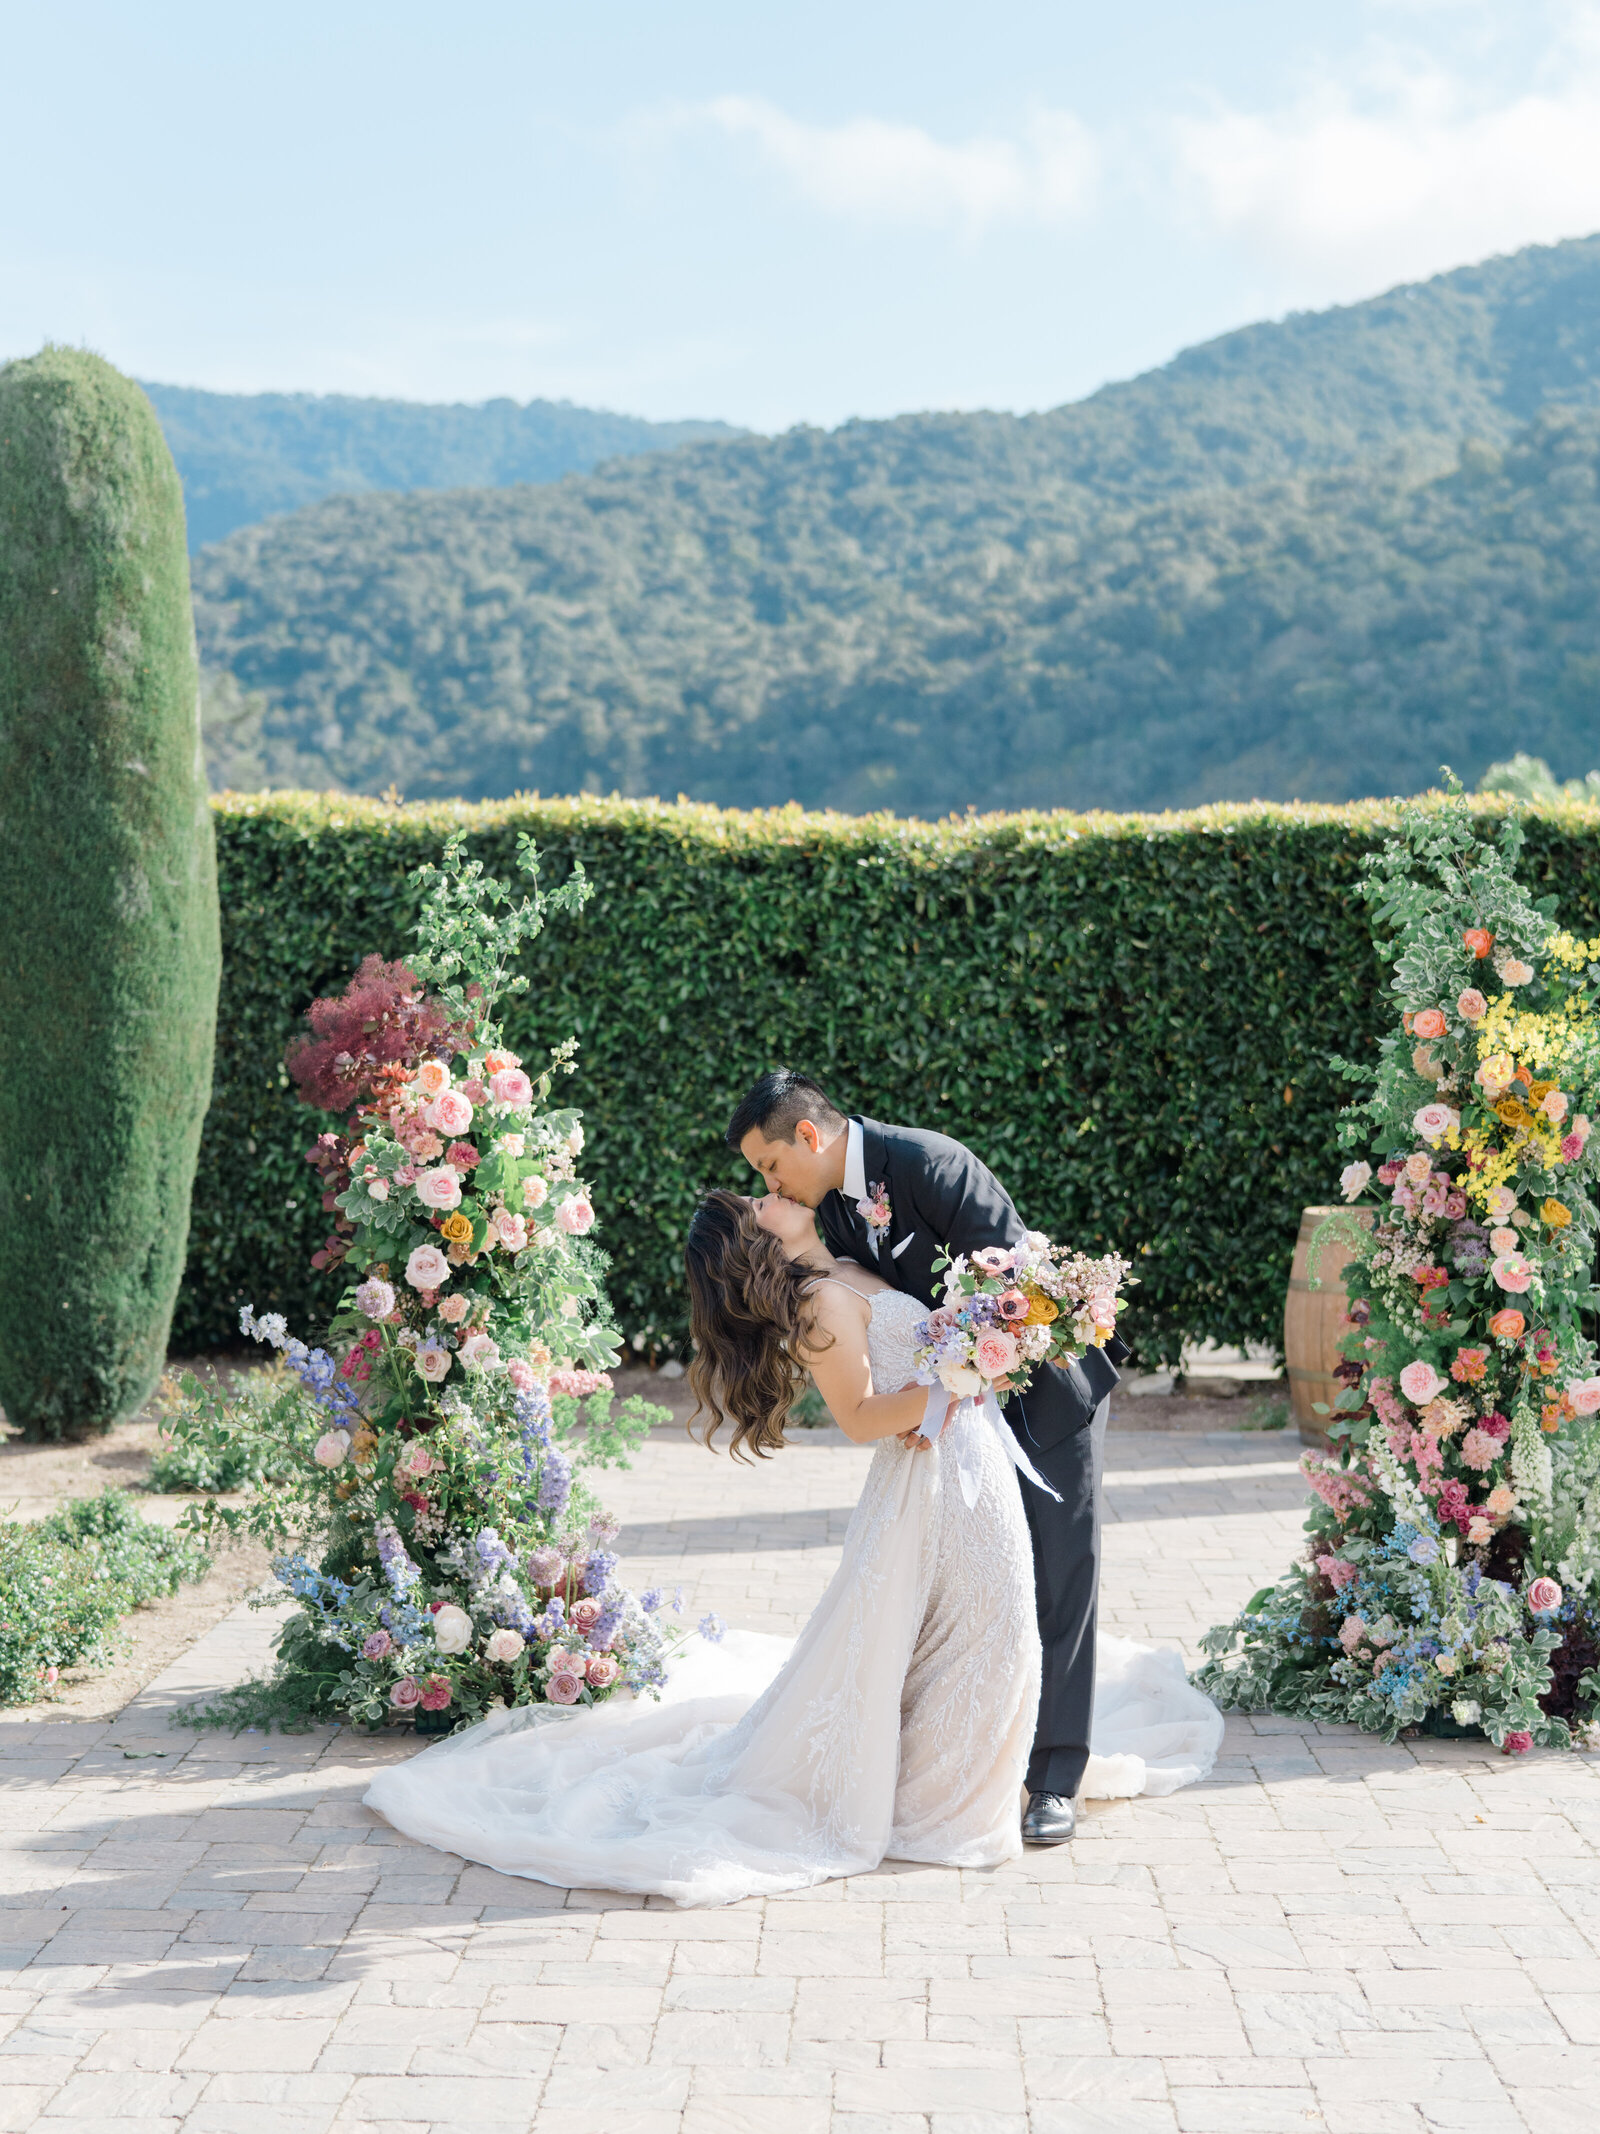 Groom dipping the bride and kissing her in front of beautiful hills